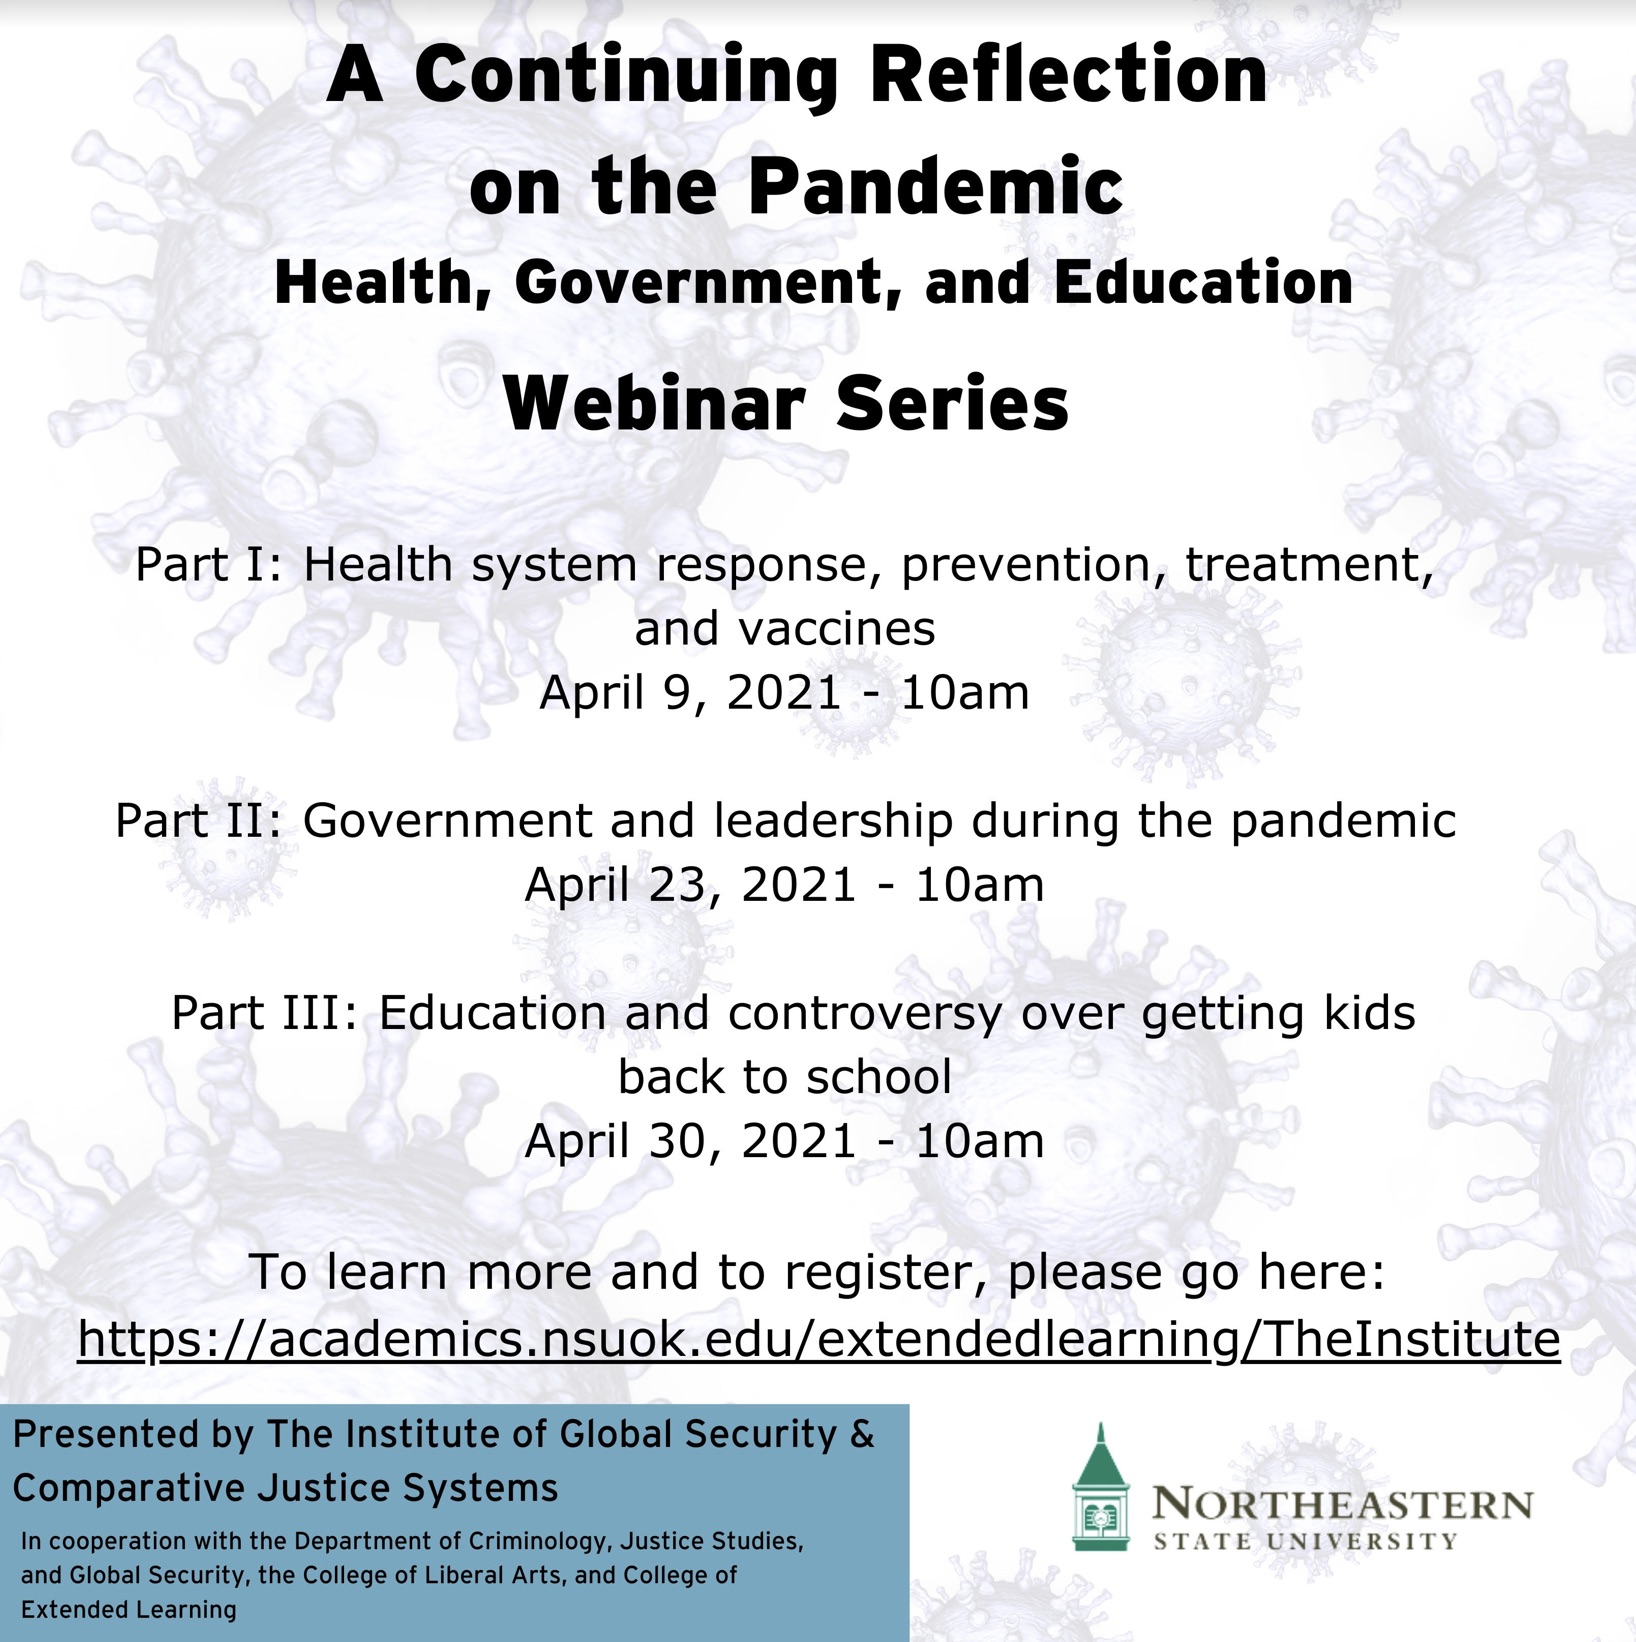 A Continuing Reflection on the Pandemic Health, Government, and Education Webinar Series event poster